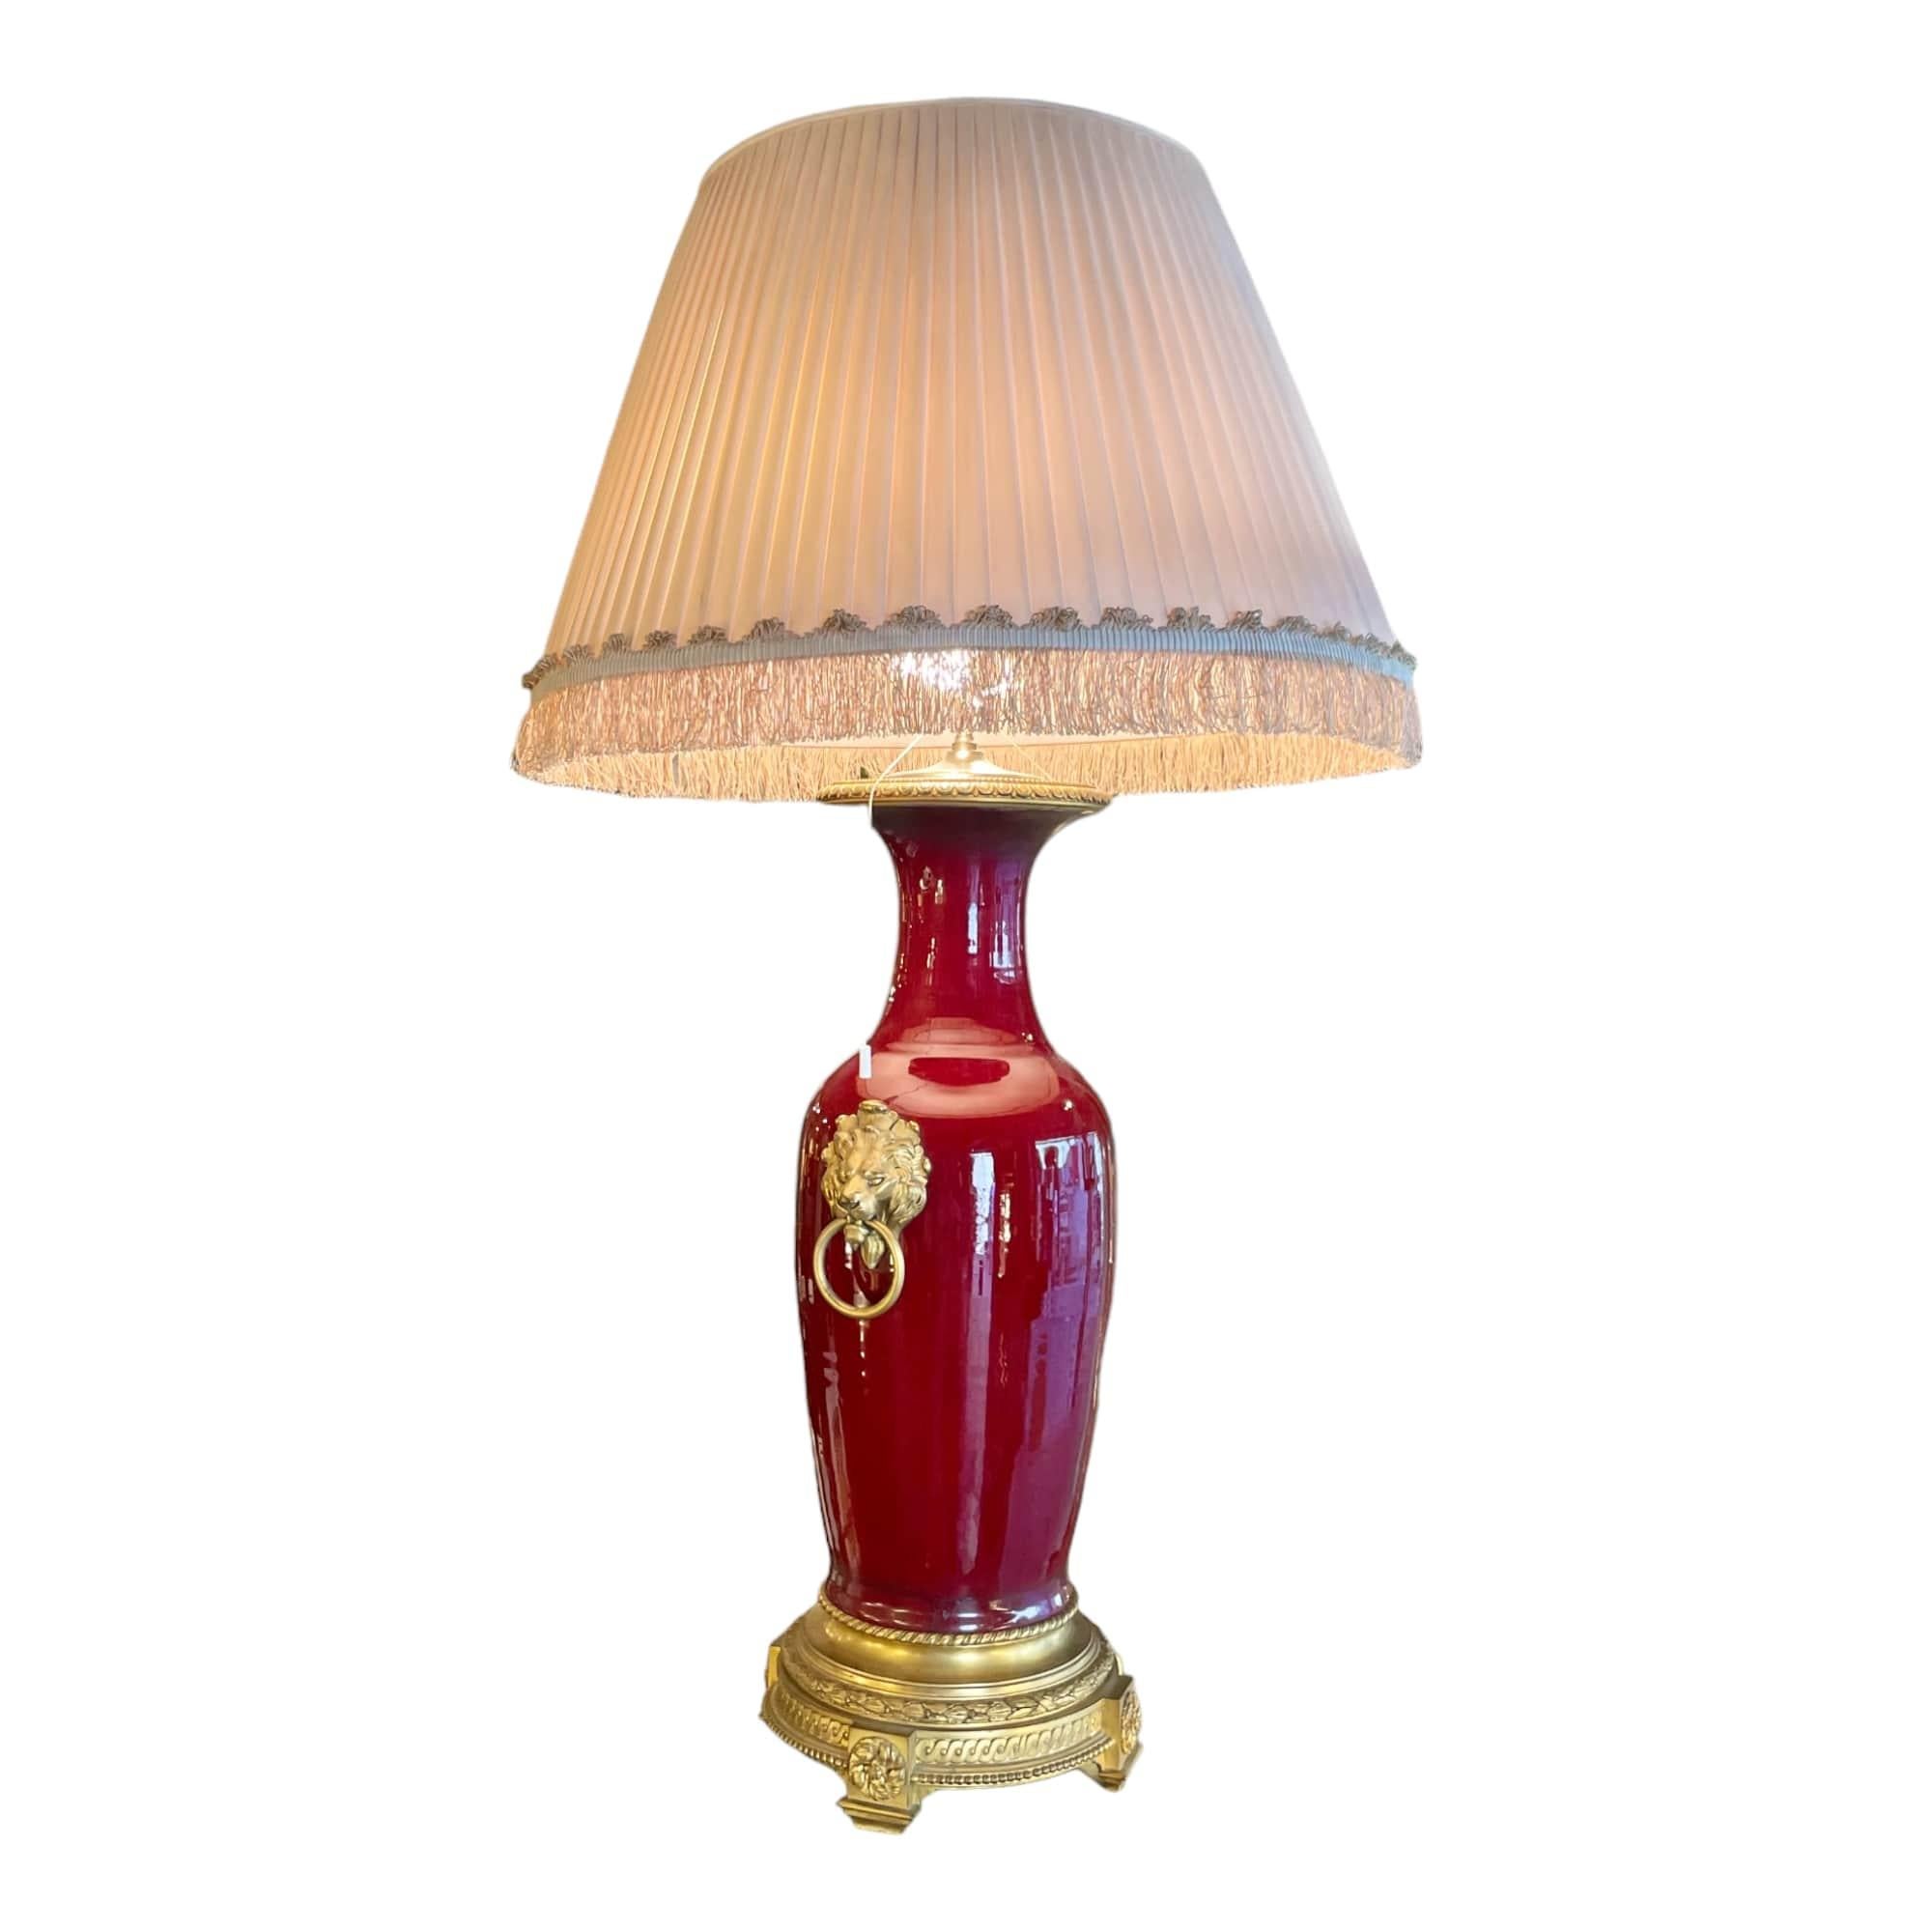 This magnificent “Blood of Ox” porcelain lamp with its bronze frame with lion heads is a true piece of art from the mid-20th century. Its elegant and timeless design makes it a stunning antique designed around 1900. The painstaking details of this